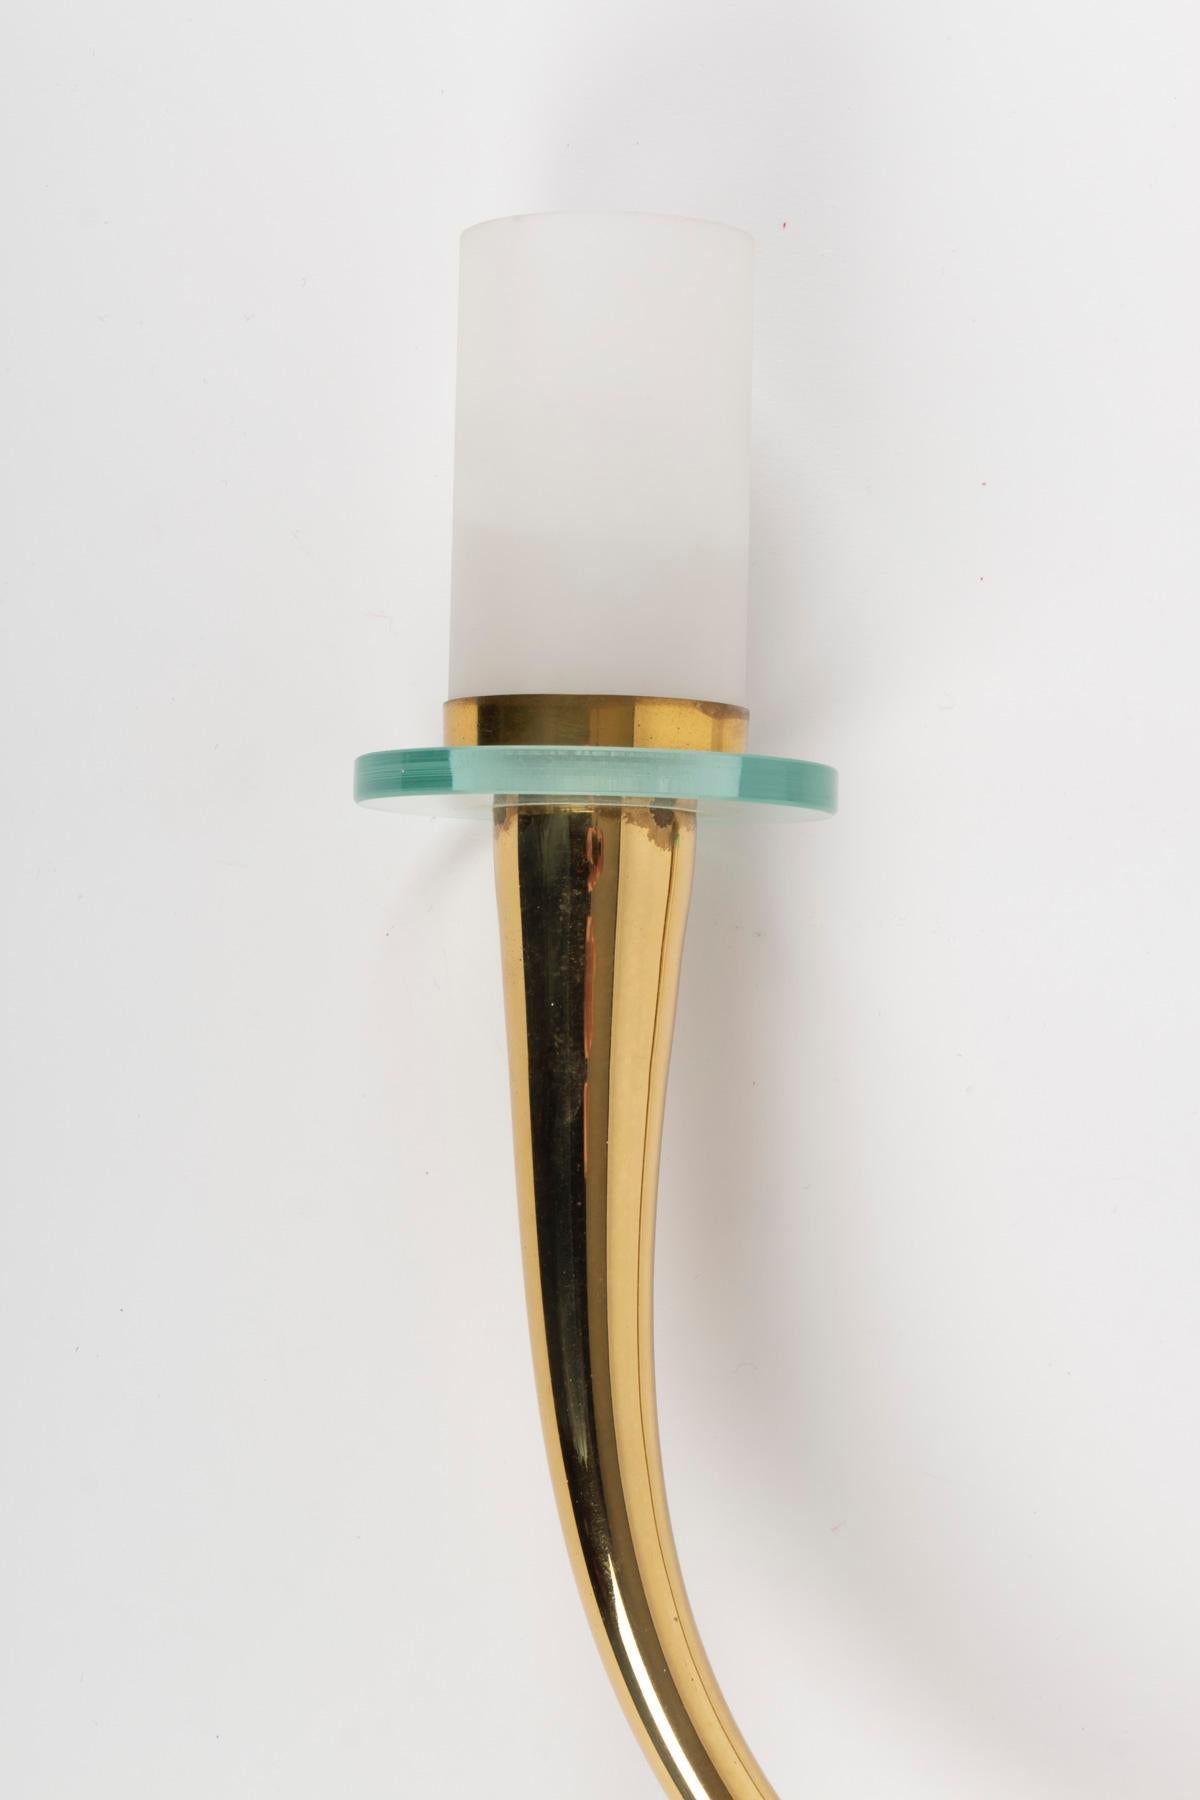 Italian 1960s Pair of Brass Sconces in the Style of Gio Ponti